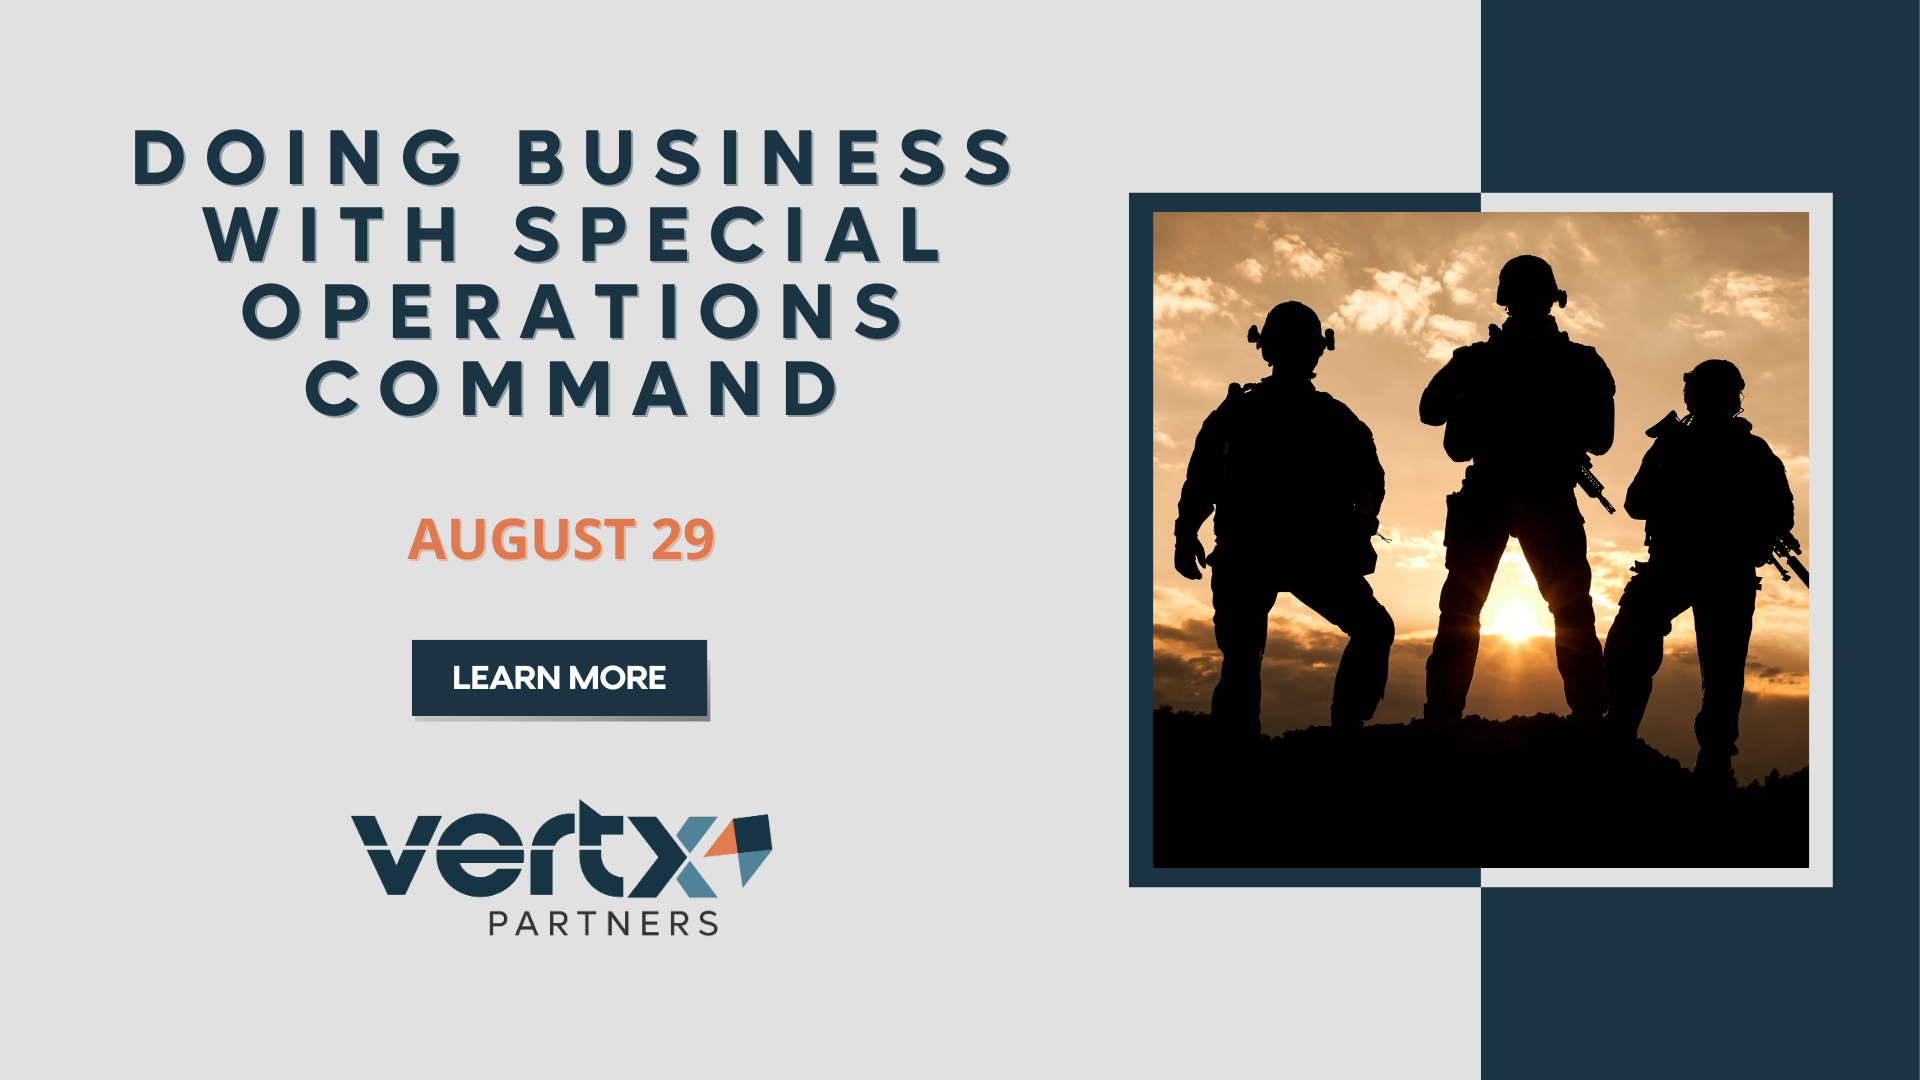 This graphic has the title "Doing Business With Special Operations Command" with the date August 29 under it and a photo to the right of 3 soliders with a sunset in the background.